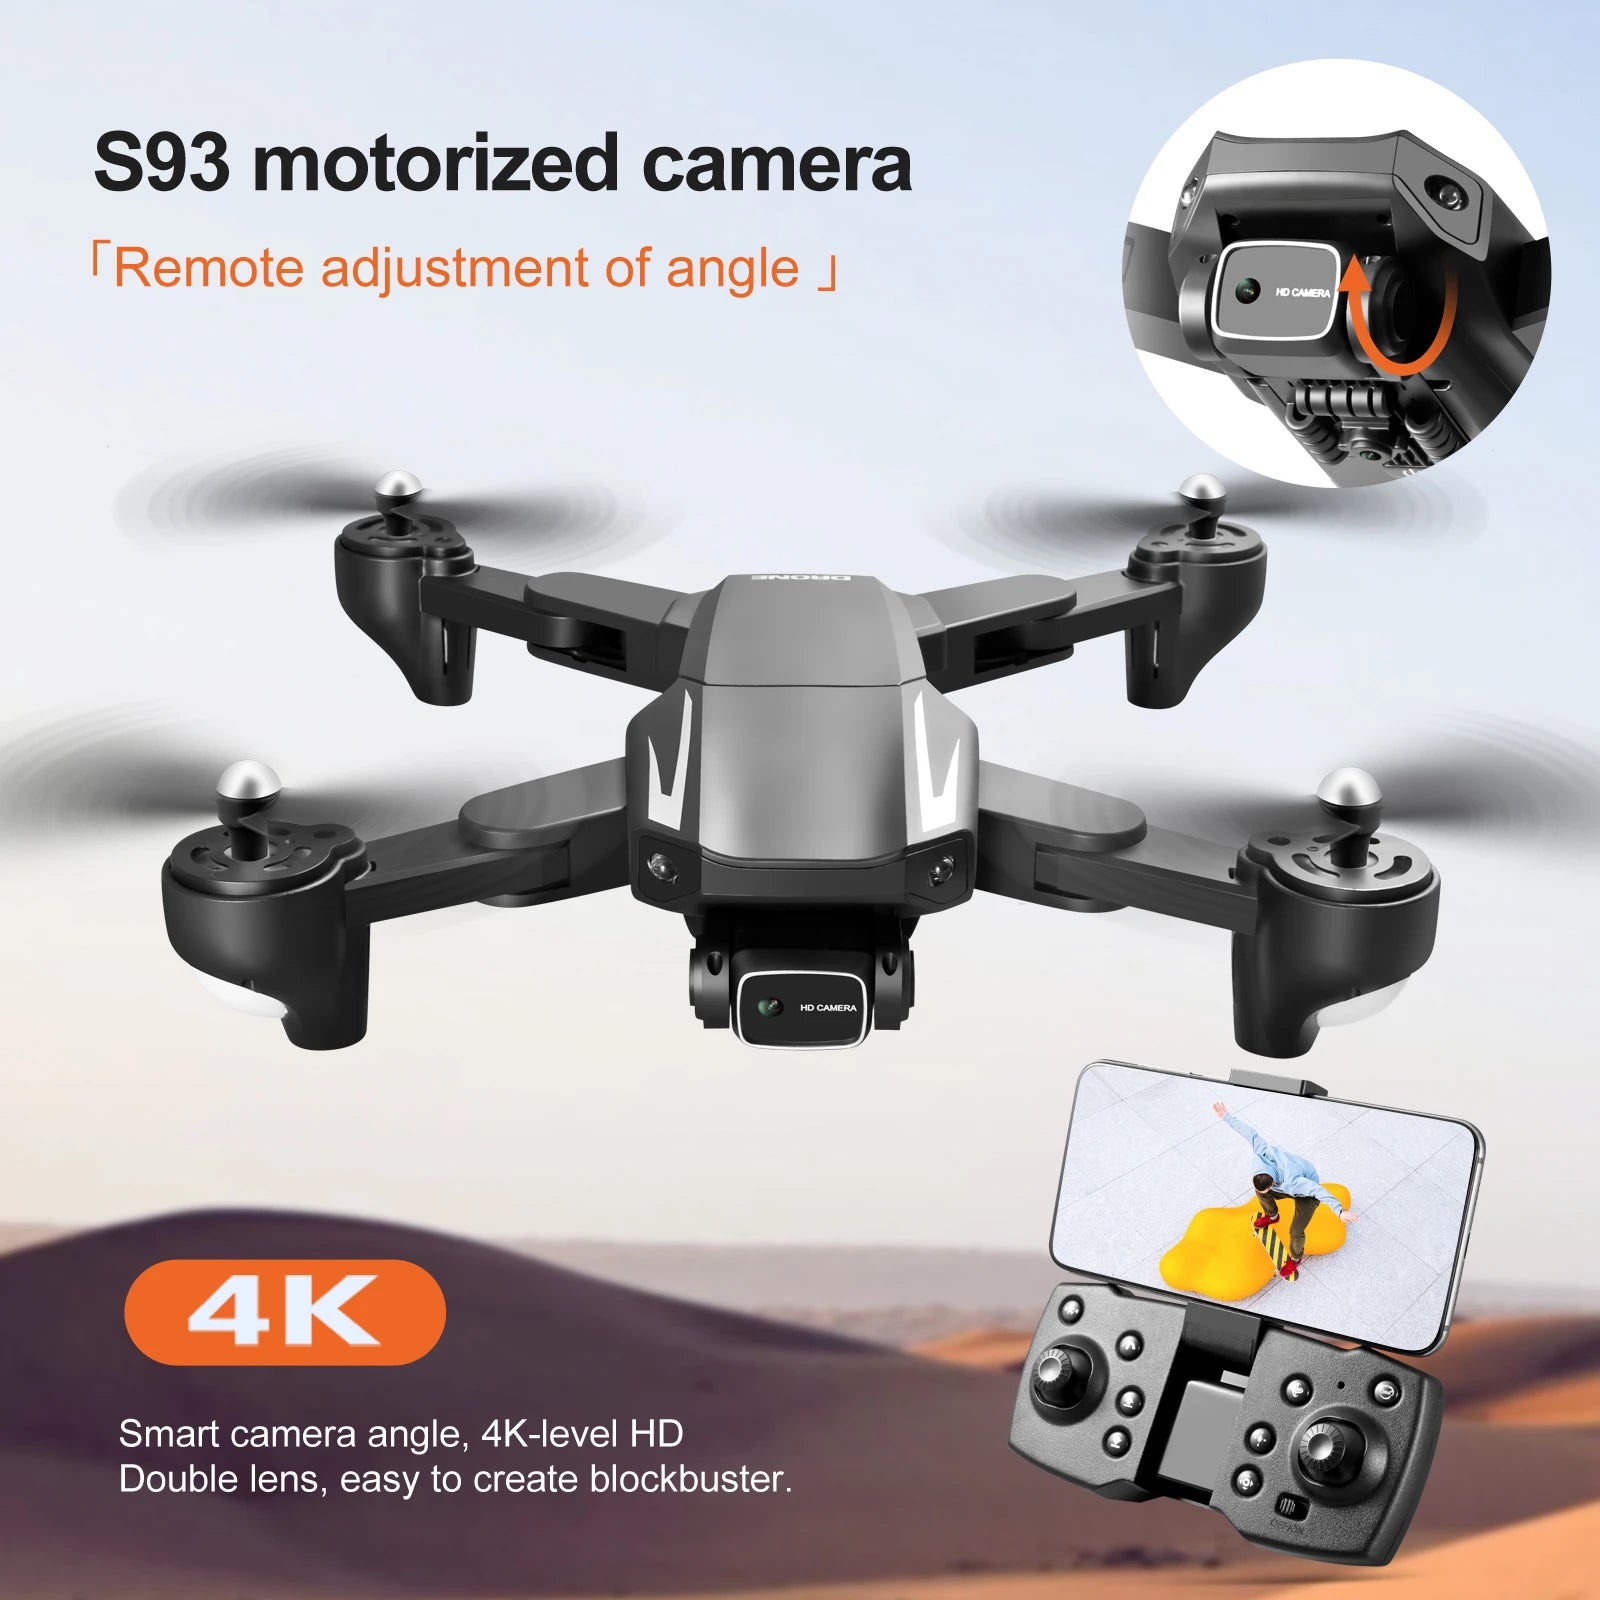 S93 Drone, s93 motorized camera tremote adjustment of angle 